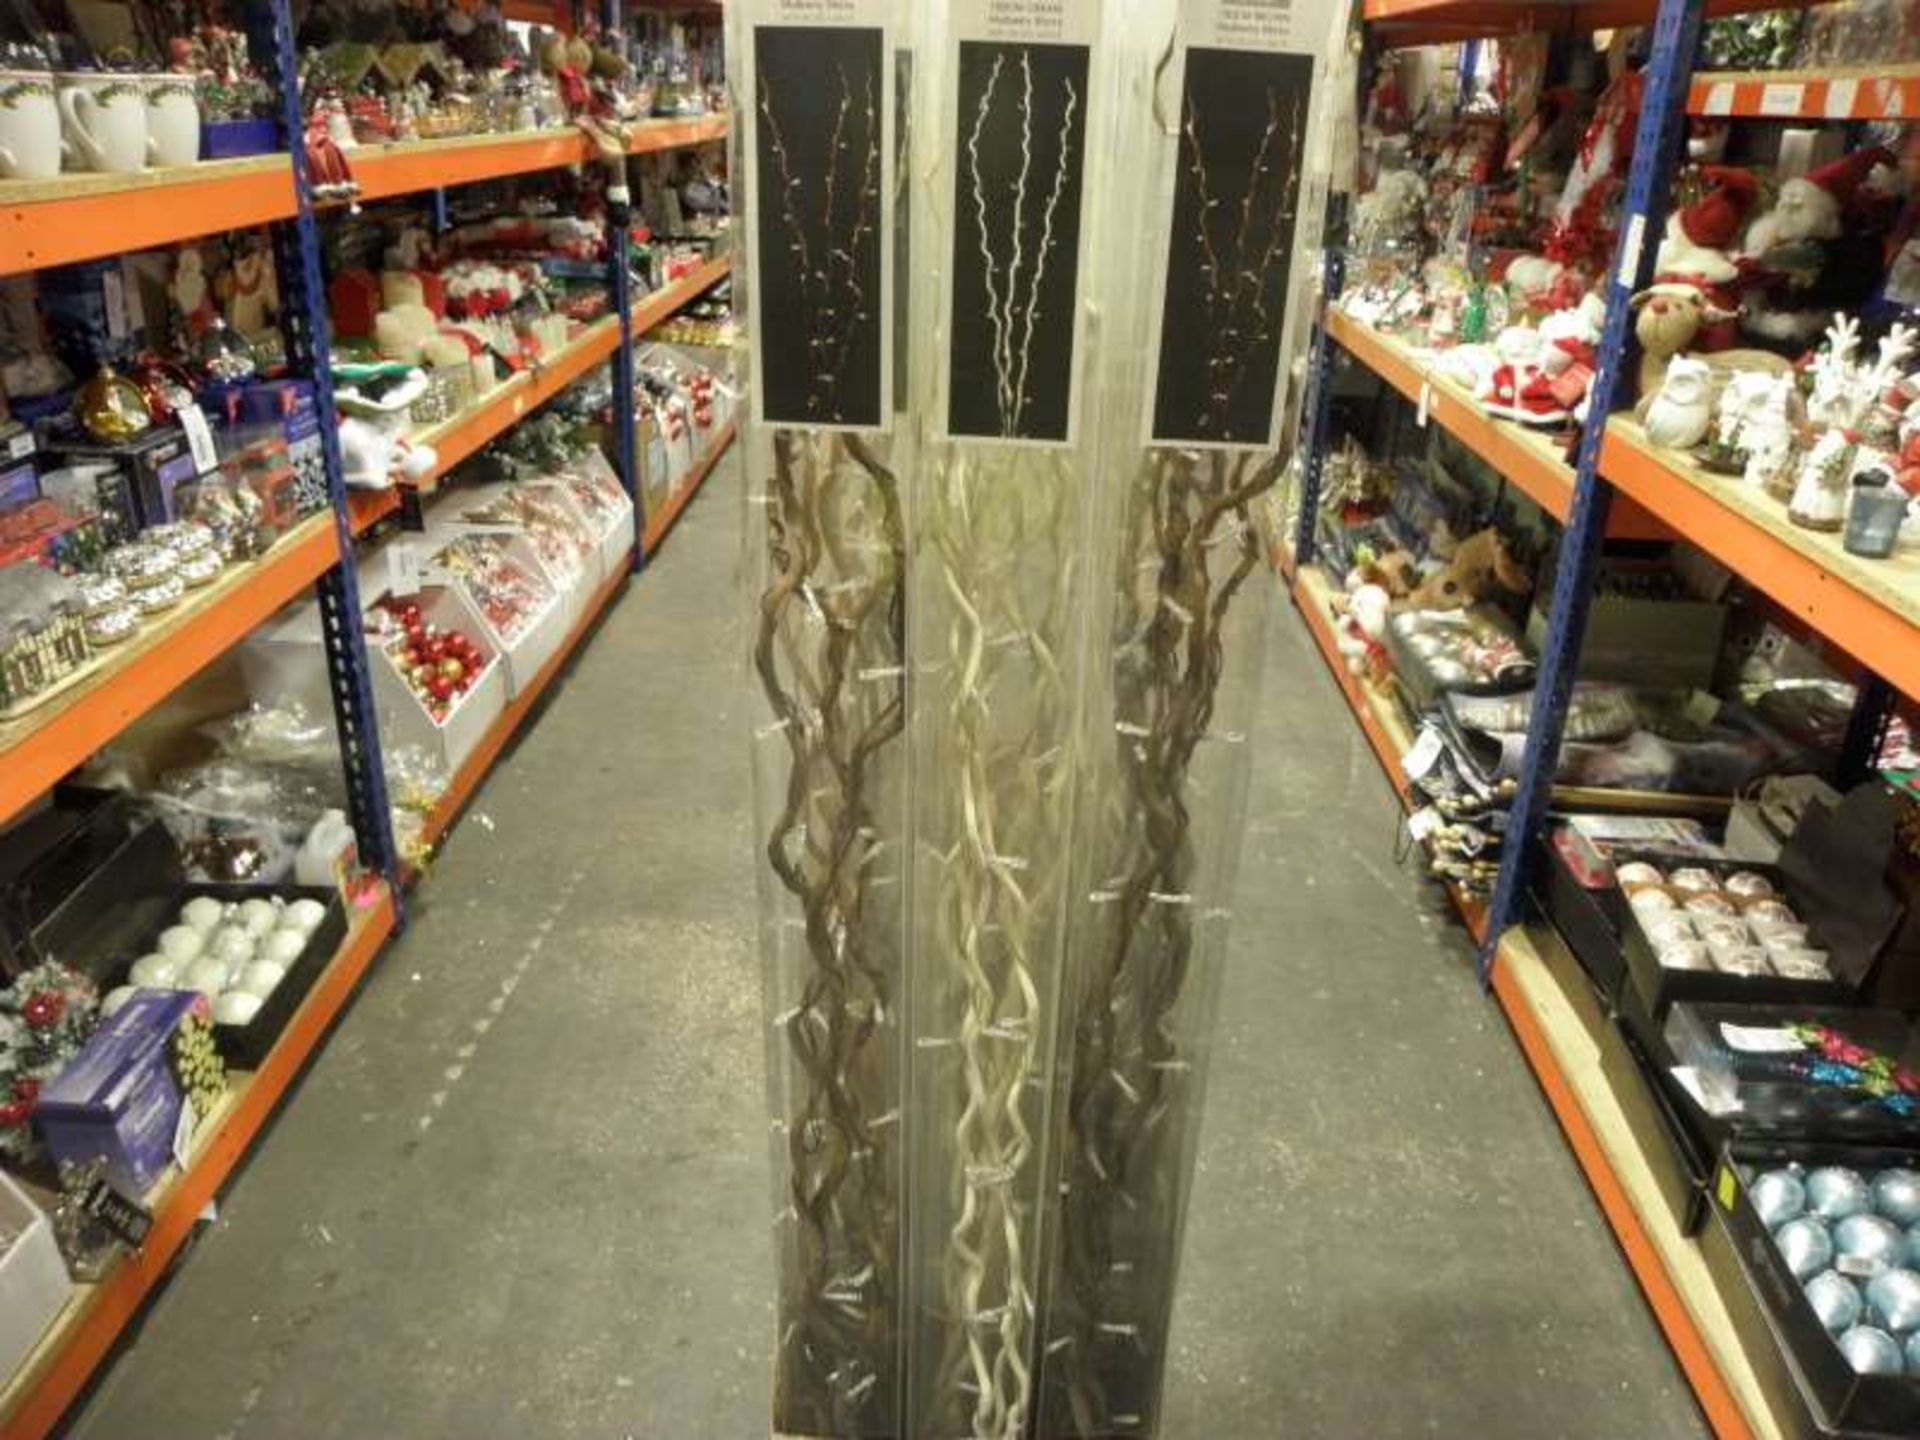 12 X PACKS OF LIT- UP TWIG LIGHTS IN 1 CARTON, 3 X 150 CM TWIGS WITH 30 LED LIGHTS IN EACH PACK